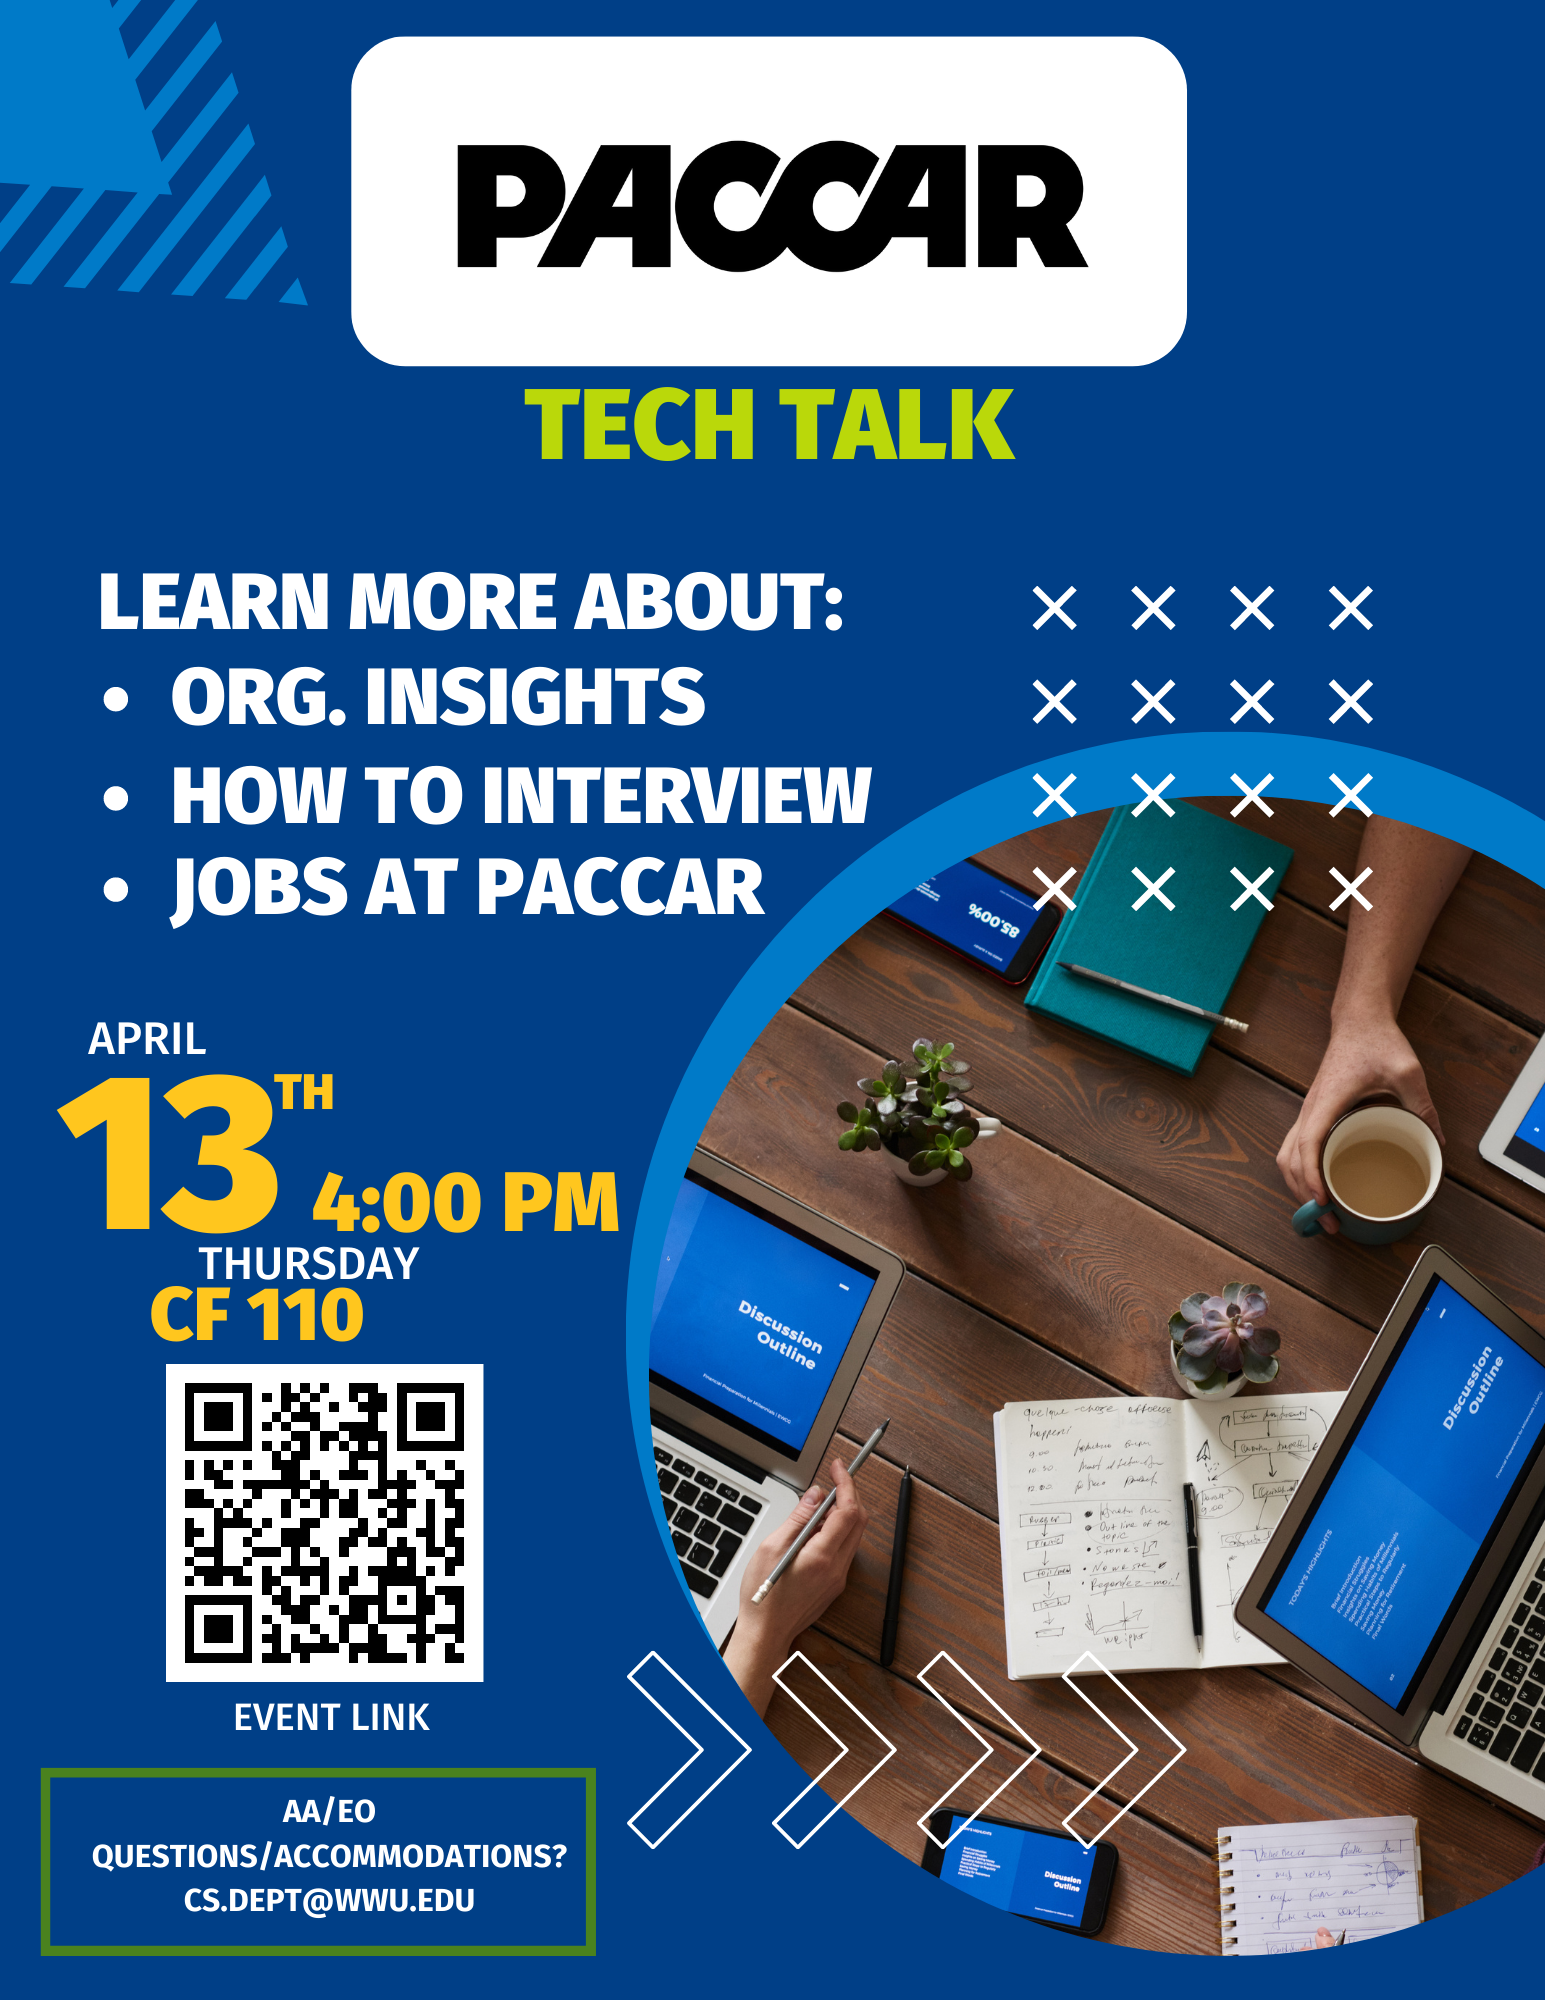 PACCAR Tech Talk. April 13, 4:00 PM in CF 110. Learn more about organization insights, how to interview, and upcoming summer jobs at PACCAR!